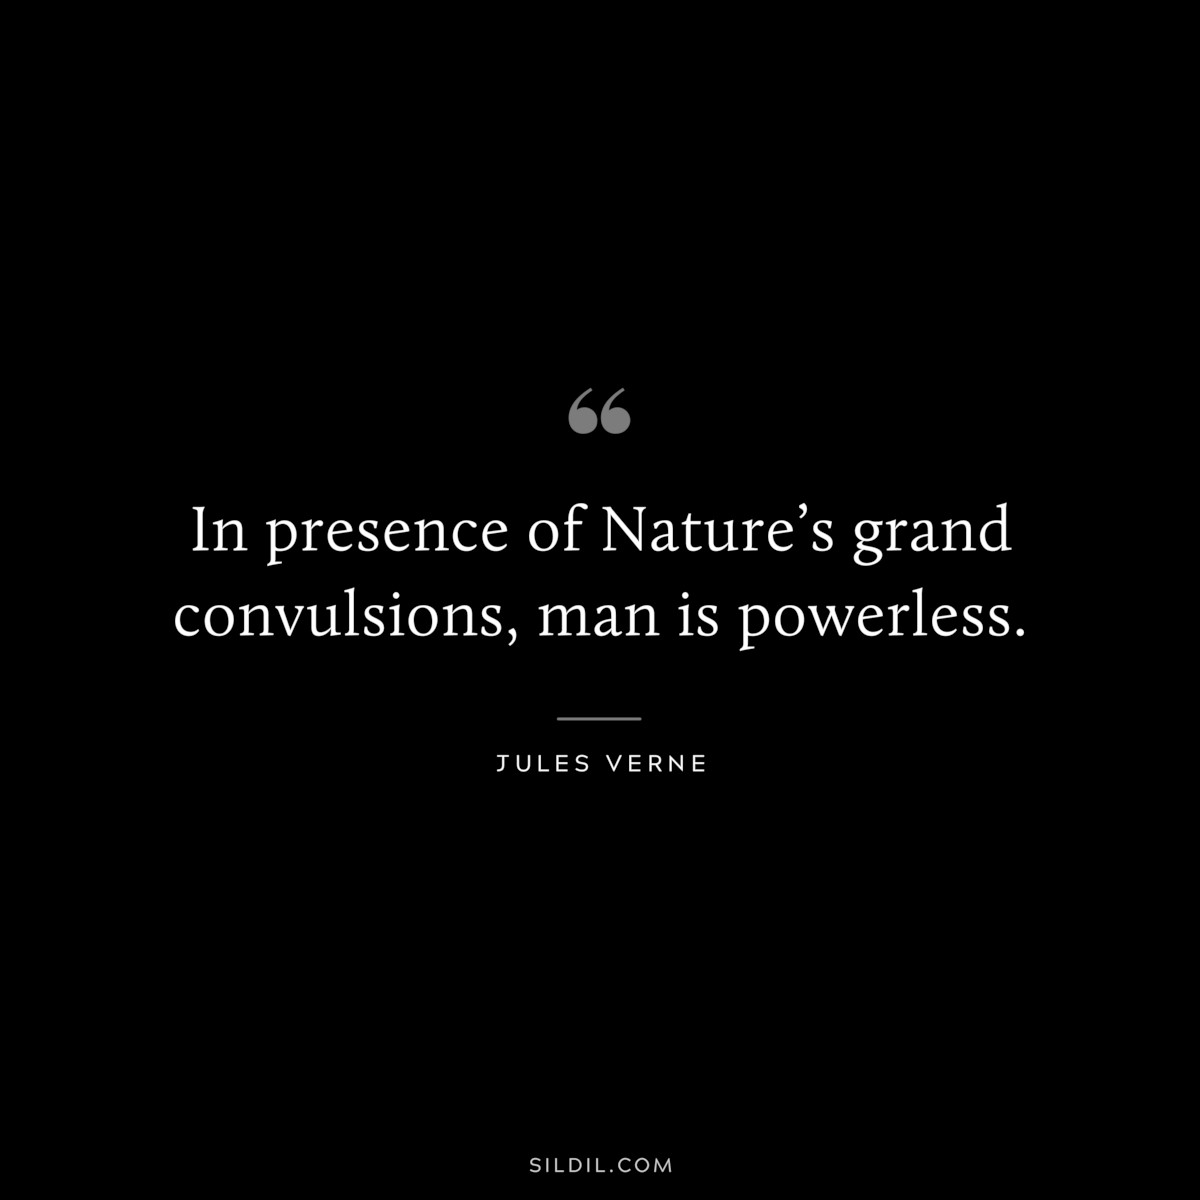 In presence of Nature’s grand convulsions, man is powerless.